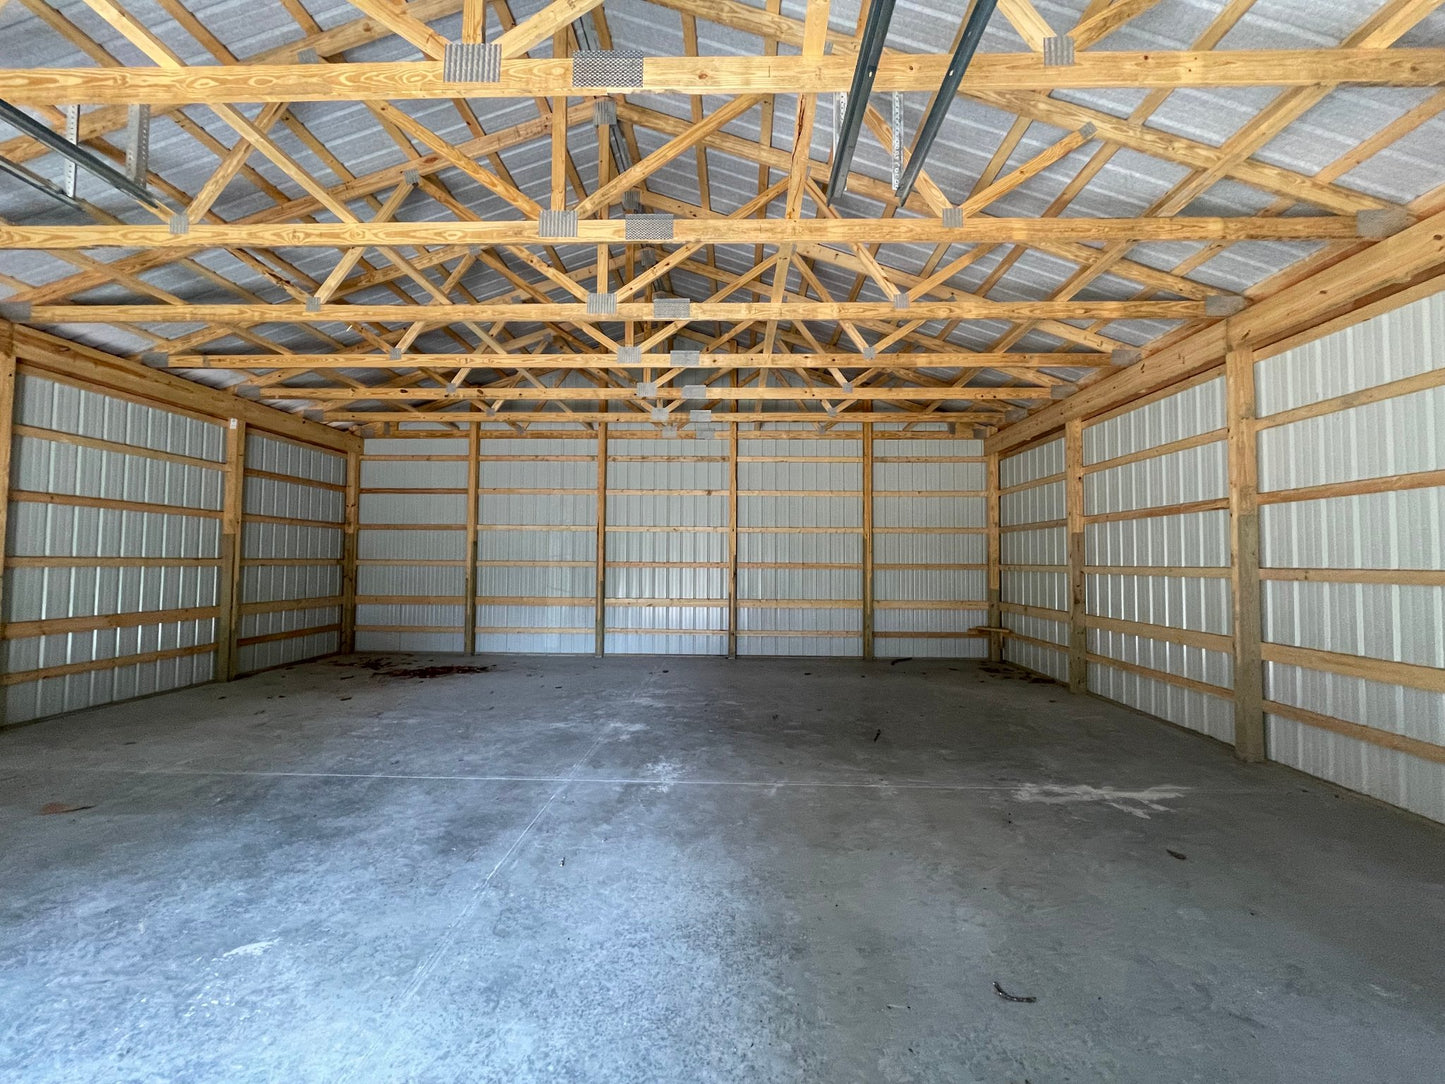 36x36 Pole Barn w/ lean to - call for pricing